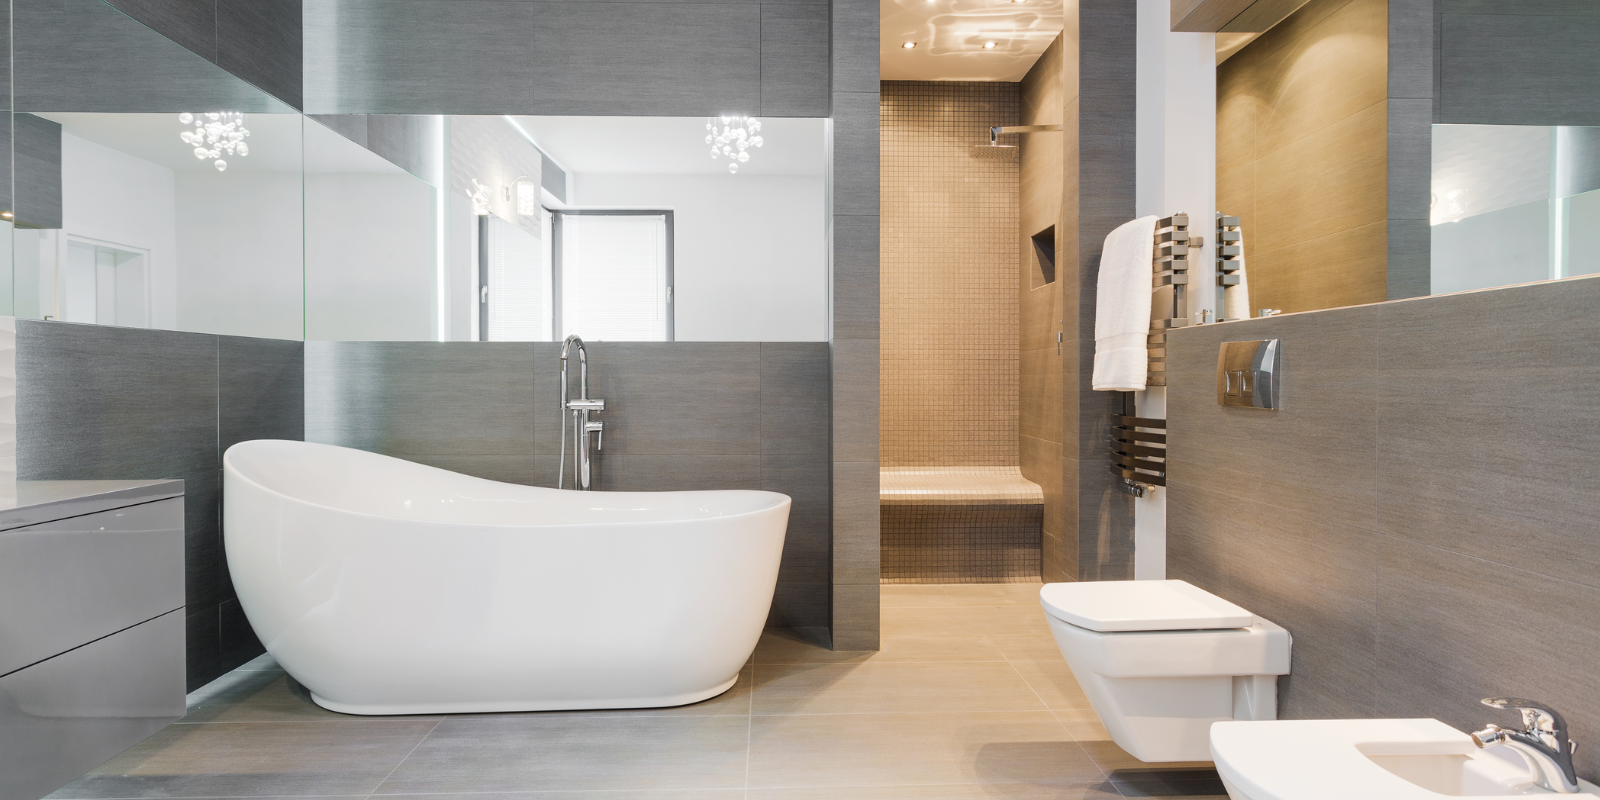 Your First Choice for Bathrooms